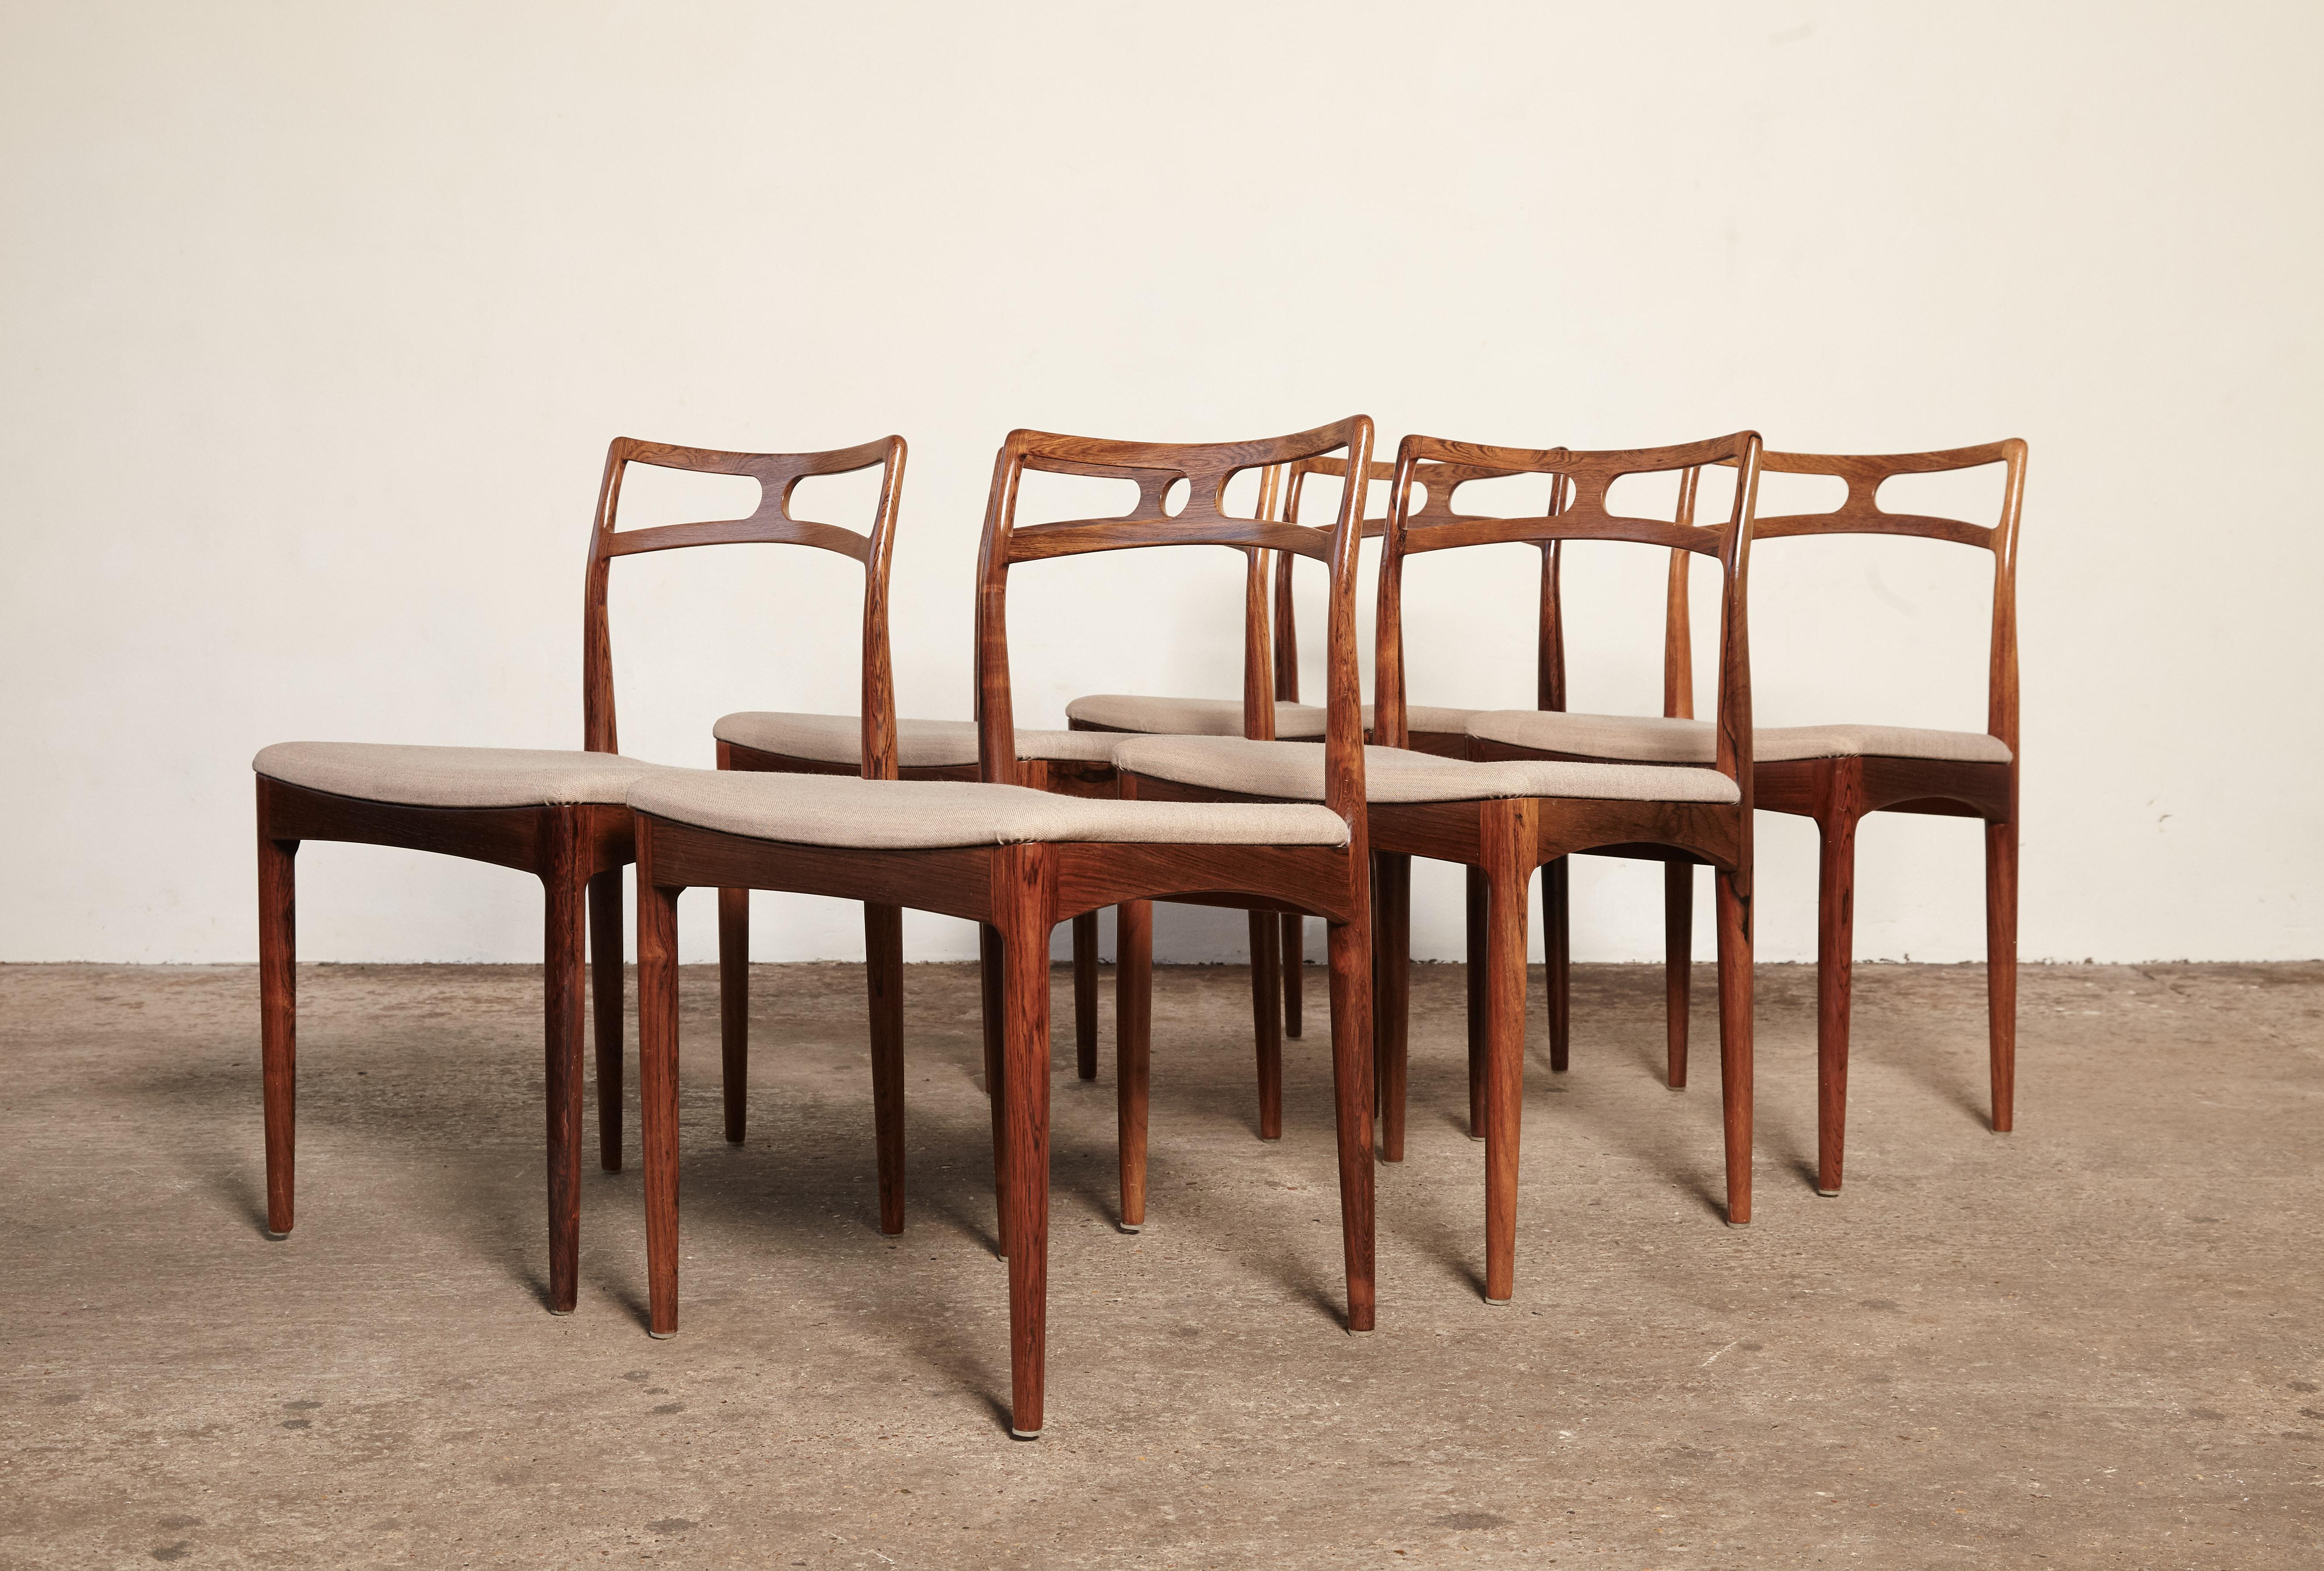 A set of six Johannes Andersen model 94 rosewood dining chairs, produced by Christian Linneberg, Denmark, 1960s. Fabric seat covers. Good vintage condition. Ships worldwide.